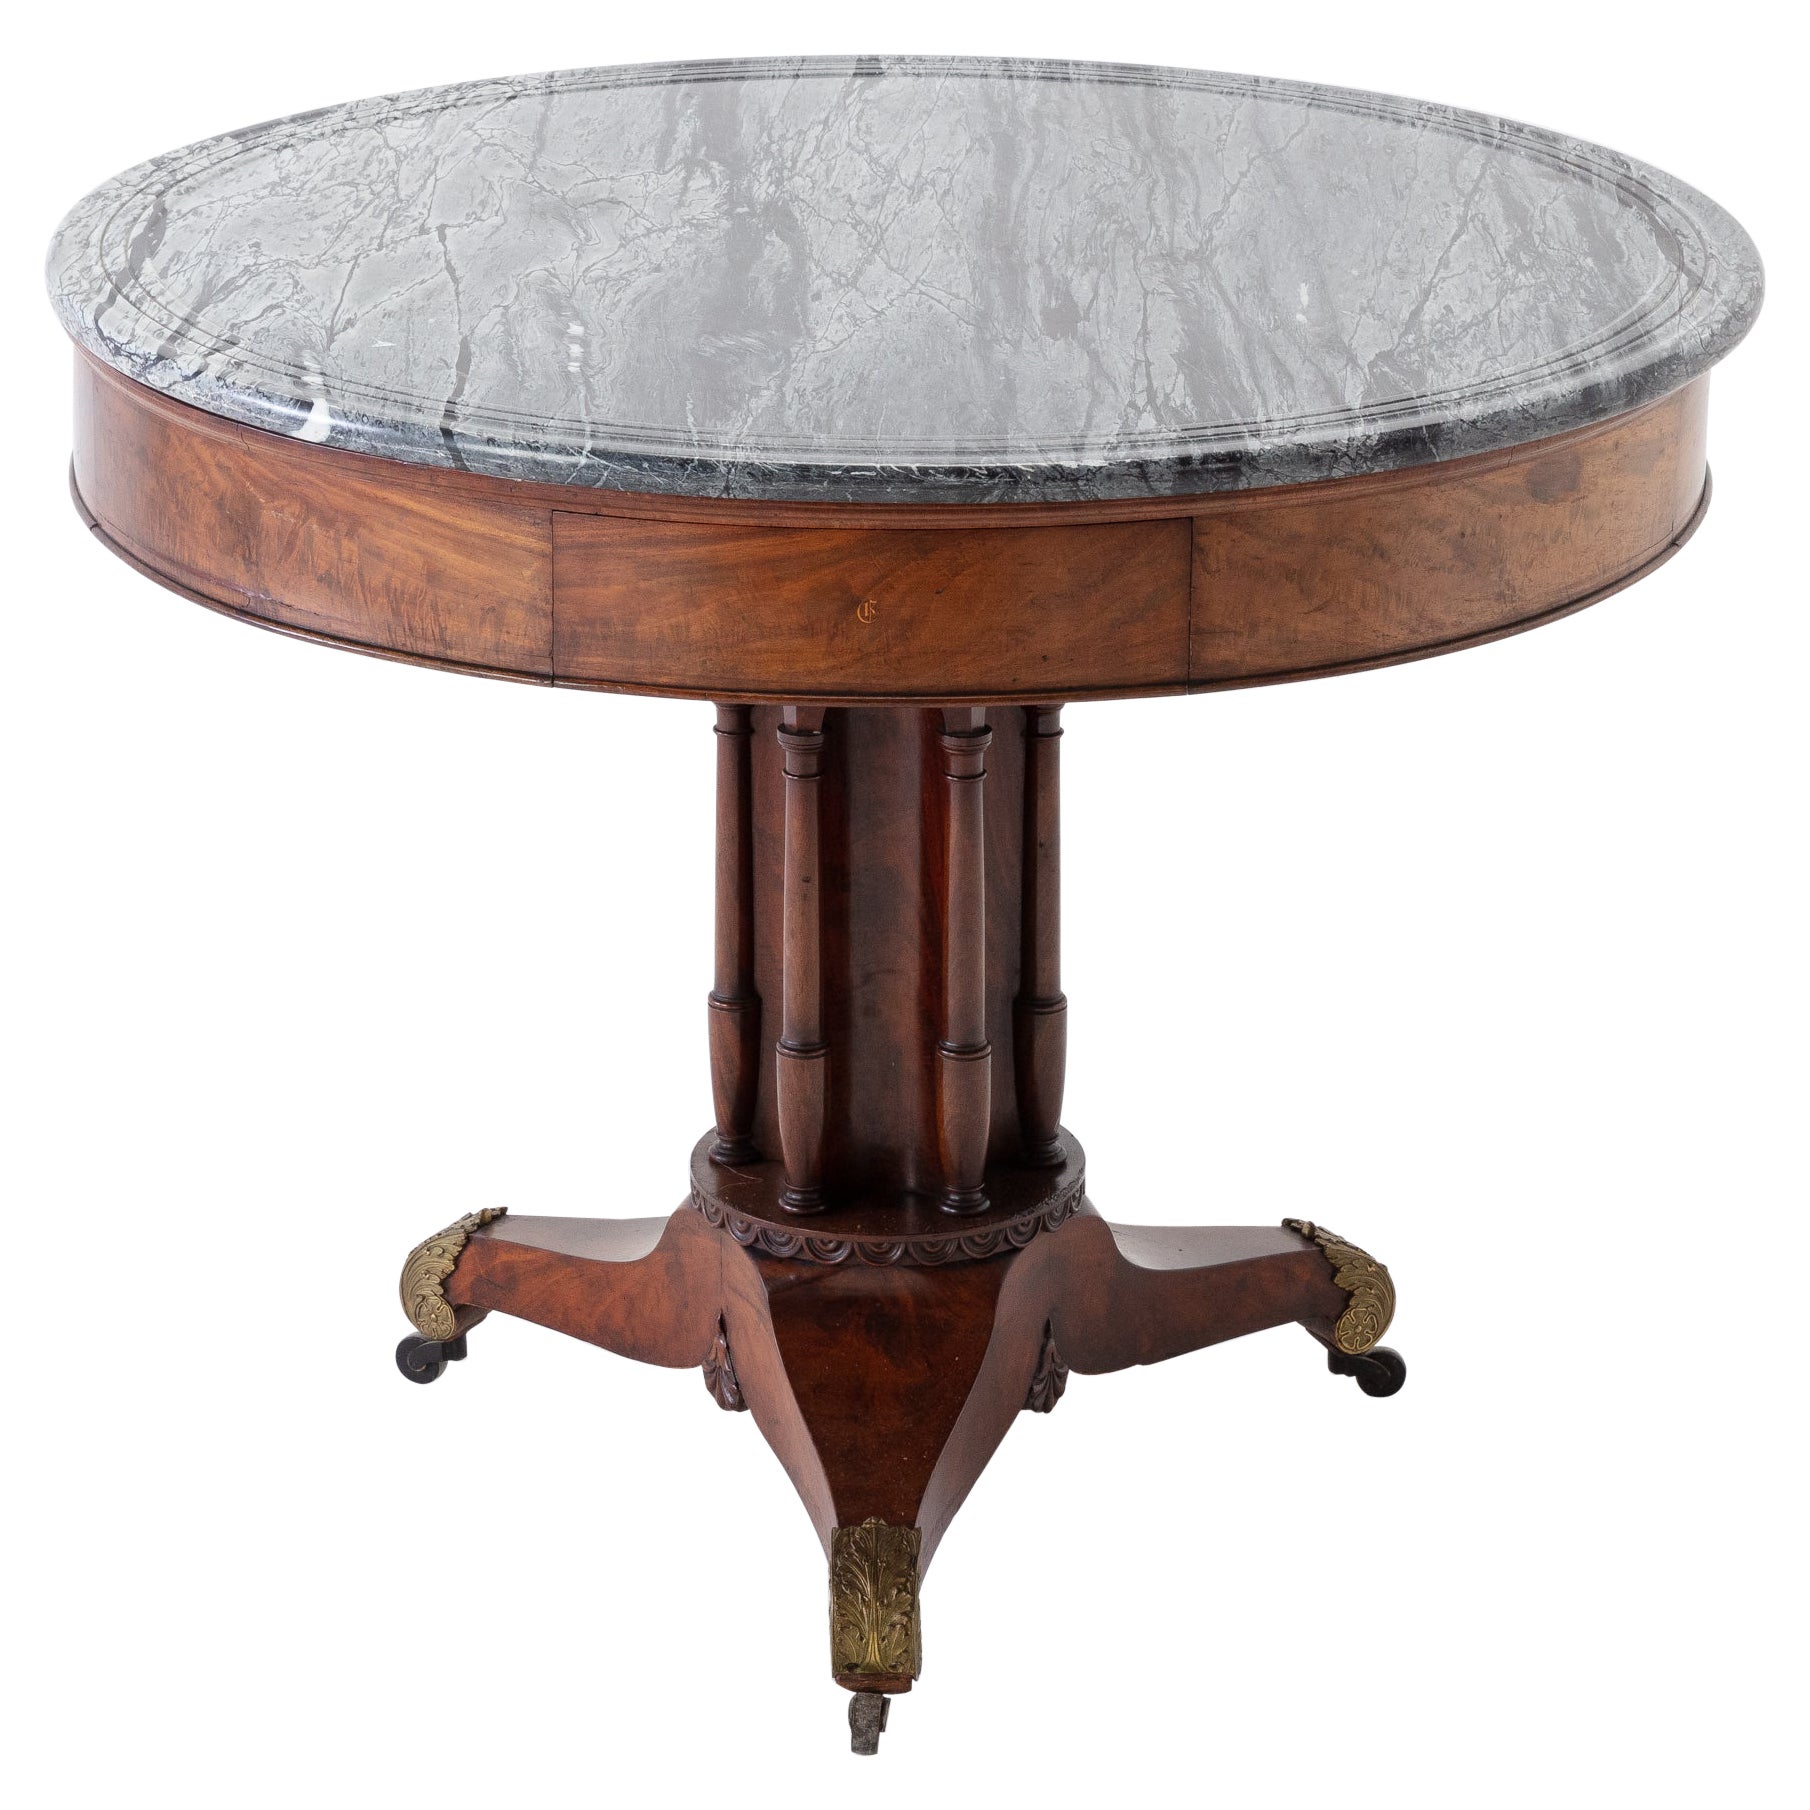 Early 19th Century French Mahogany Circular Table with Marble Top